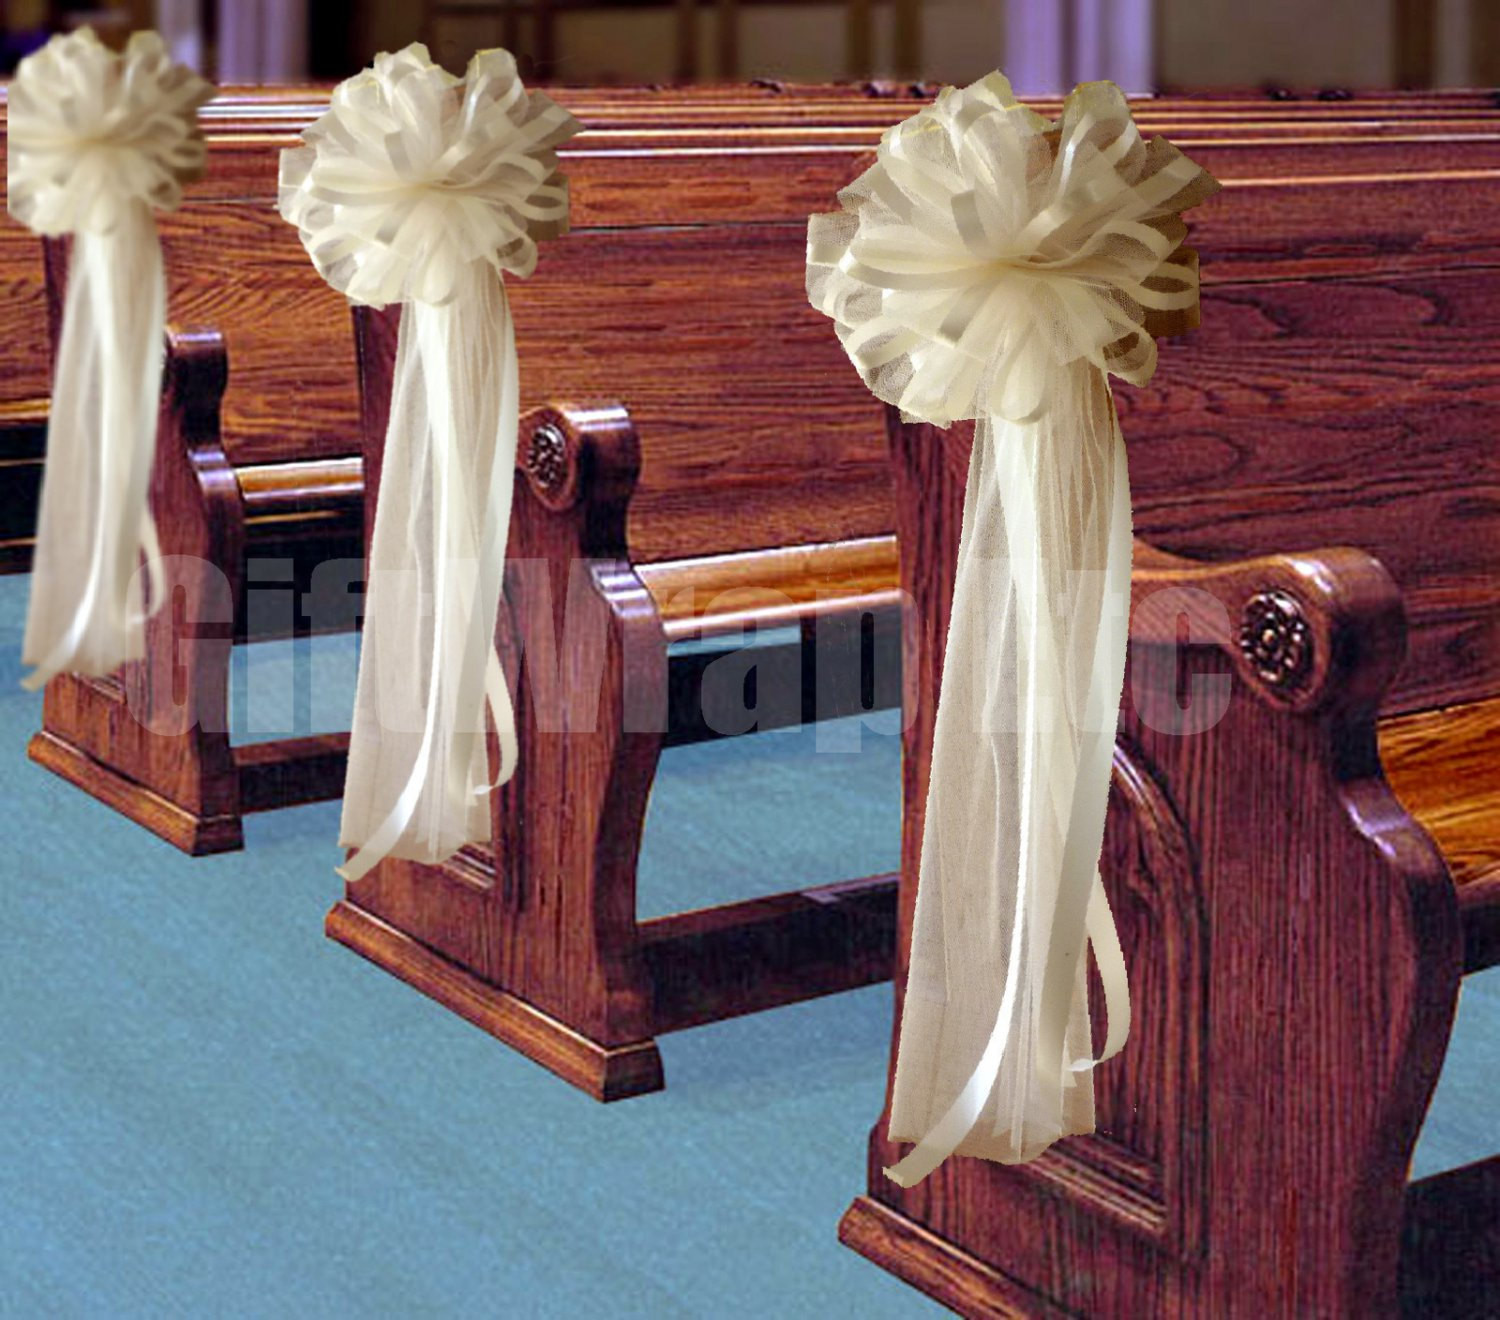 Church Wedding Decorations Ideas Pews
 1000 images about Pew Decorations on Pinterest